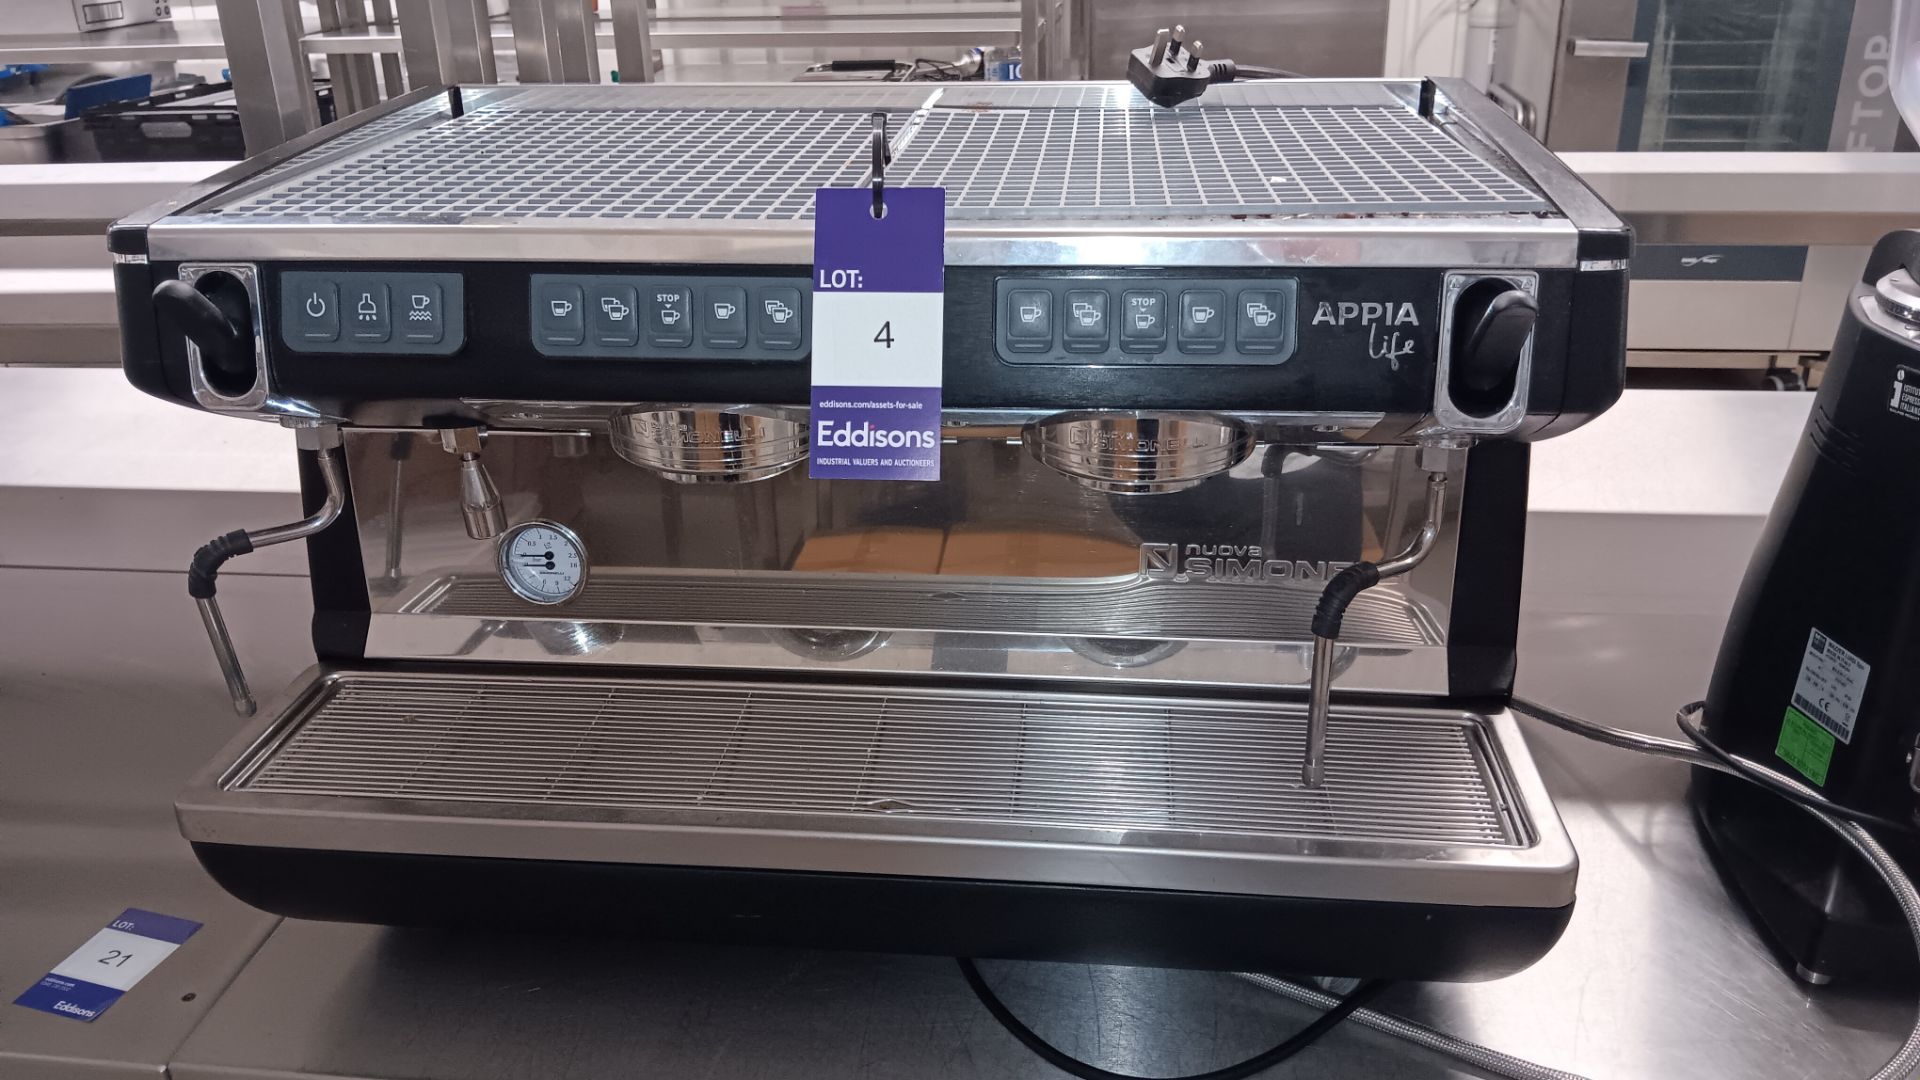 Nuova Simonolli APPIA LIFE 2 Group Commercial Coffee Machine, Serial number 605084 (2020)